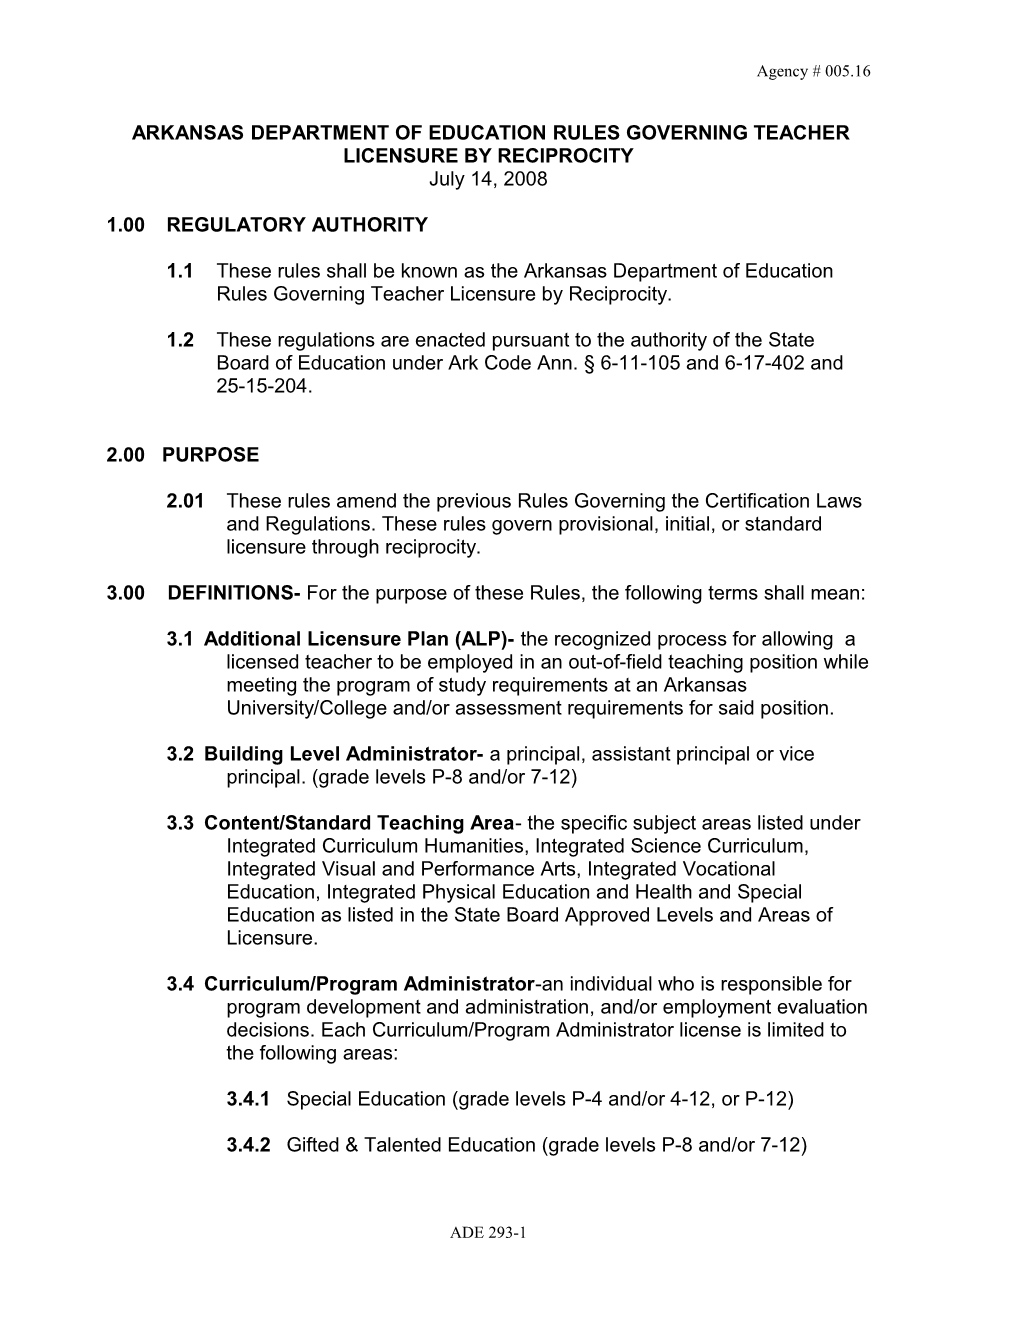 Arkansas Department of Education Emergency Amendment to Rules and Regulations Governing